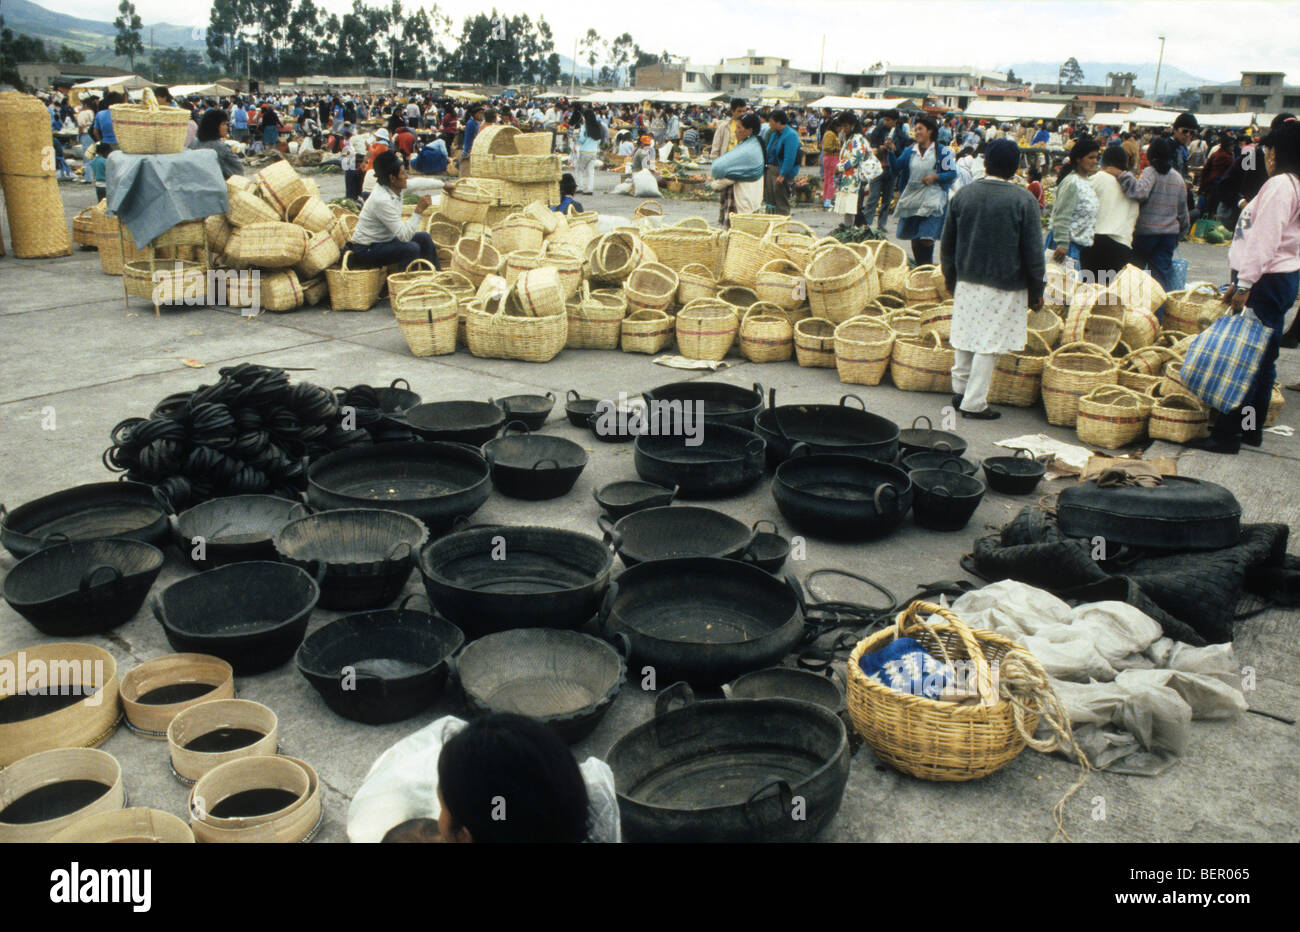 Basket sellers in Ecuador market.  Wicker and black ones made from recycled car tires Stock Photo